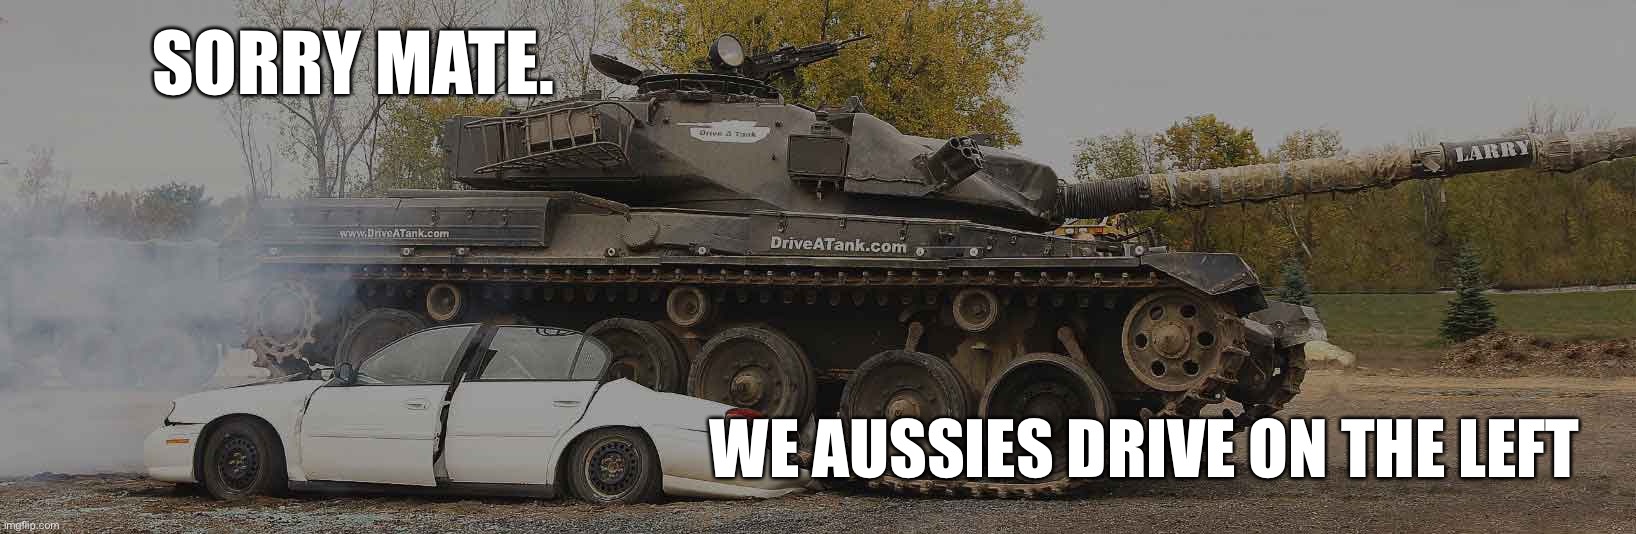 SORRY MATE. WE AUSSIES DRIVE ON THE LEFT | made w/ Imgflip meme maker